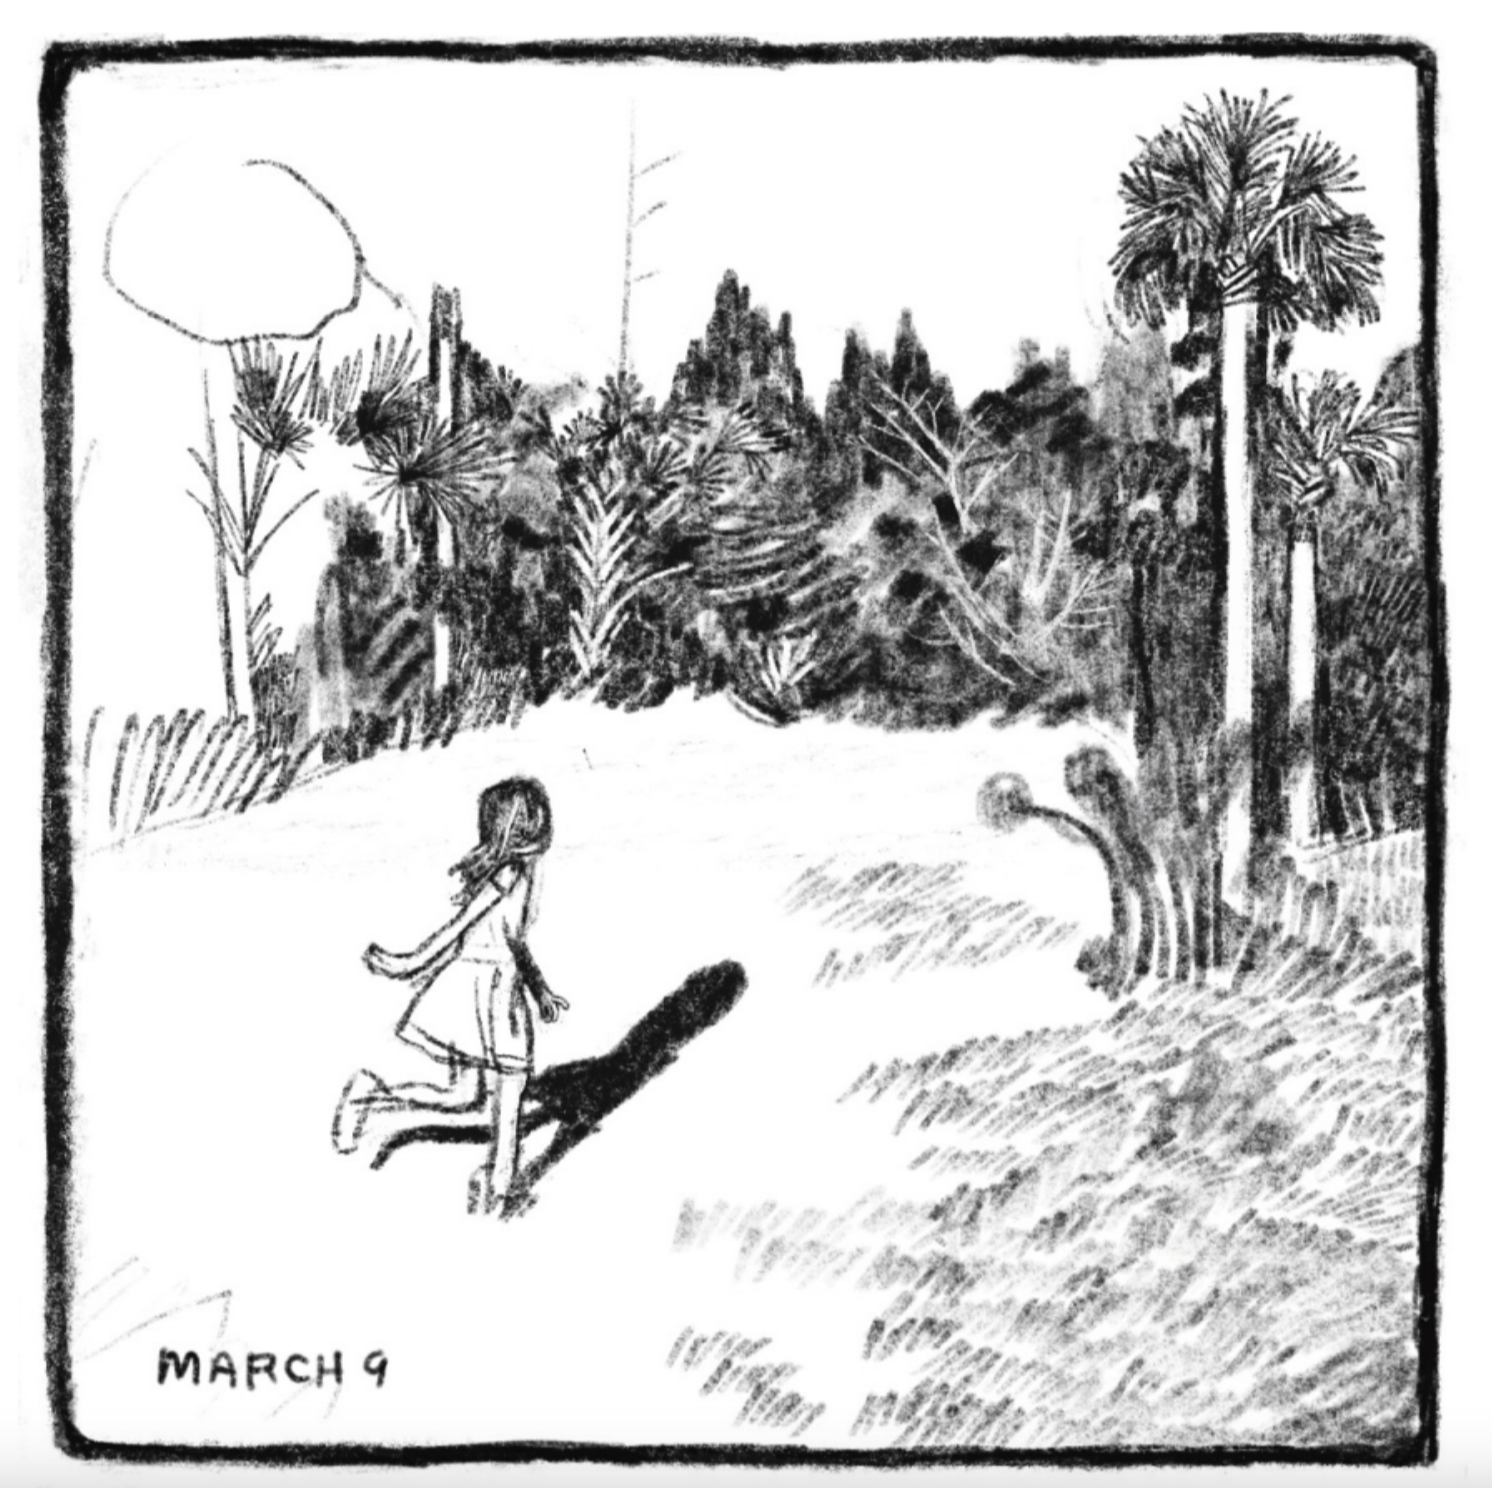 A young girl wearing a dress runs in a prairie lined by palms and other trees.
Caption reads: "MARCH 9"